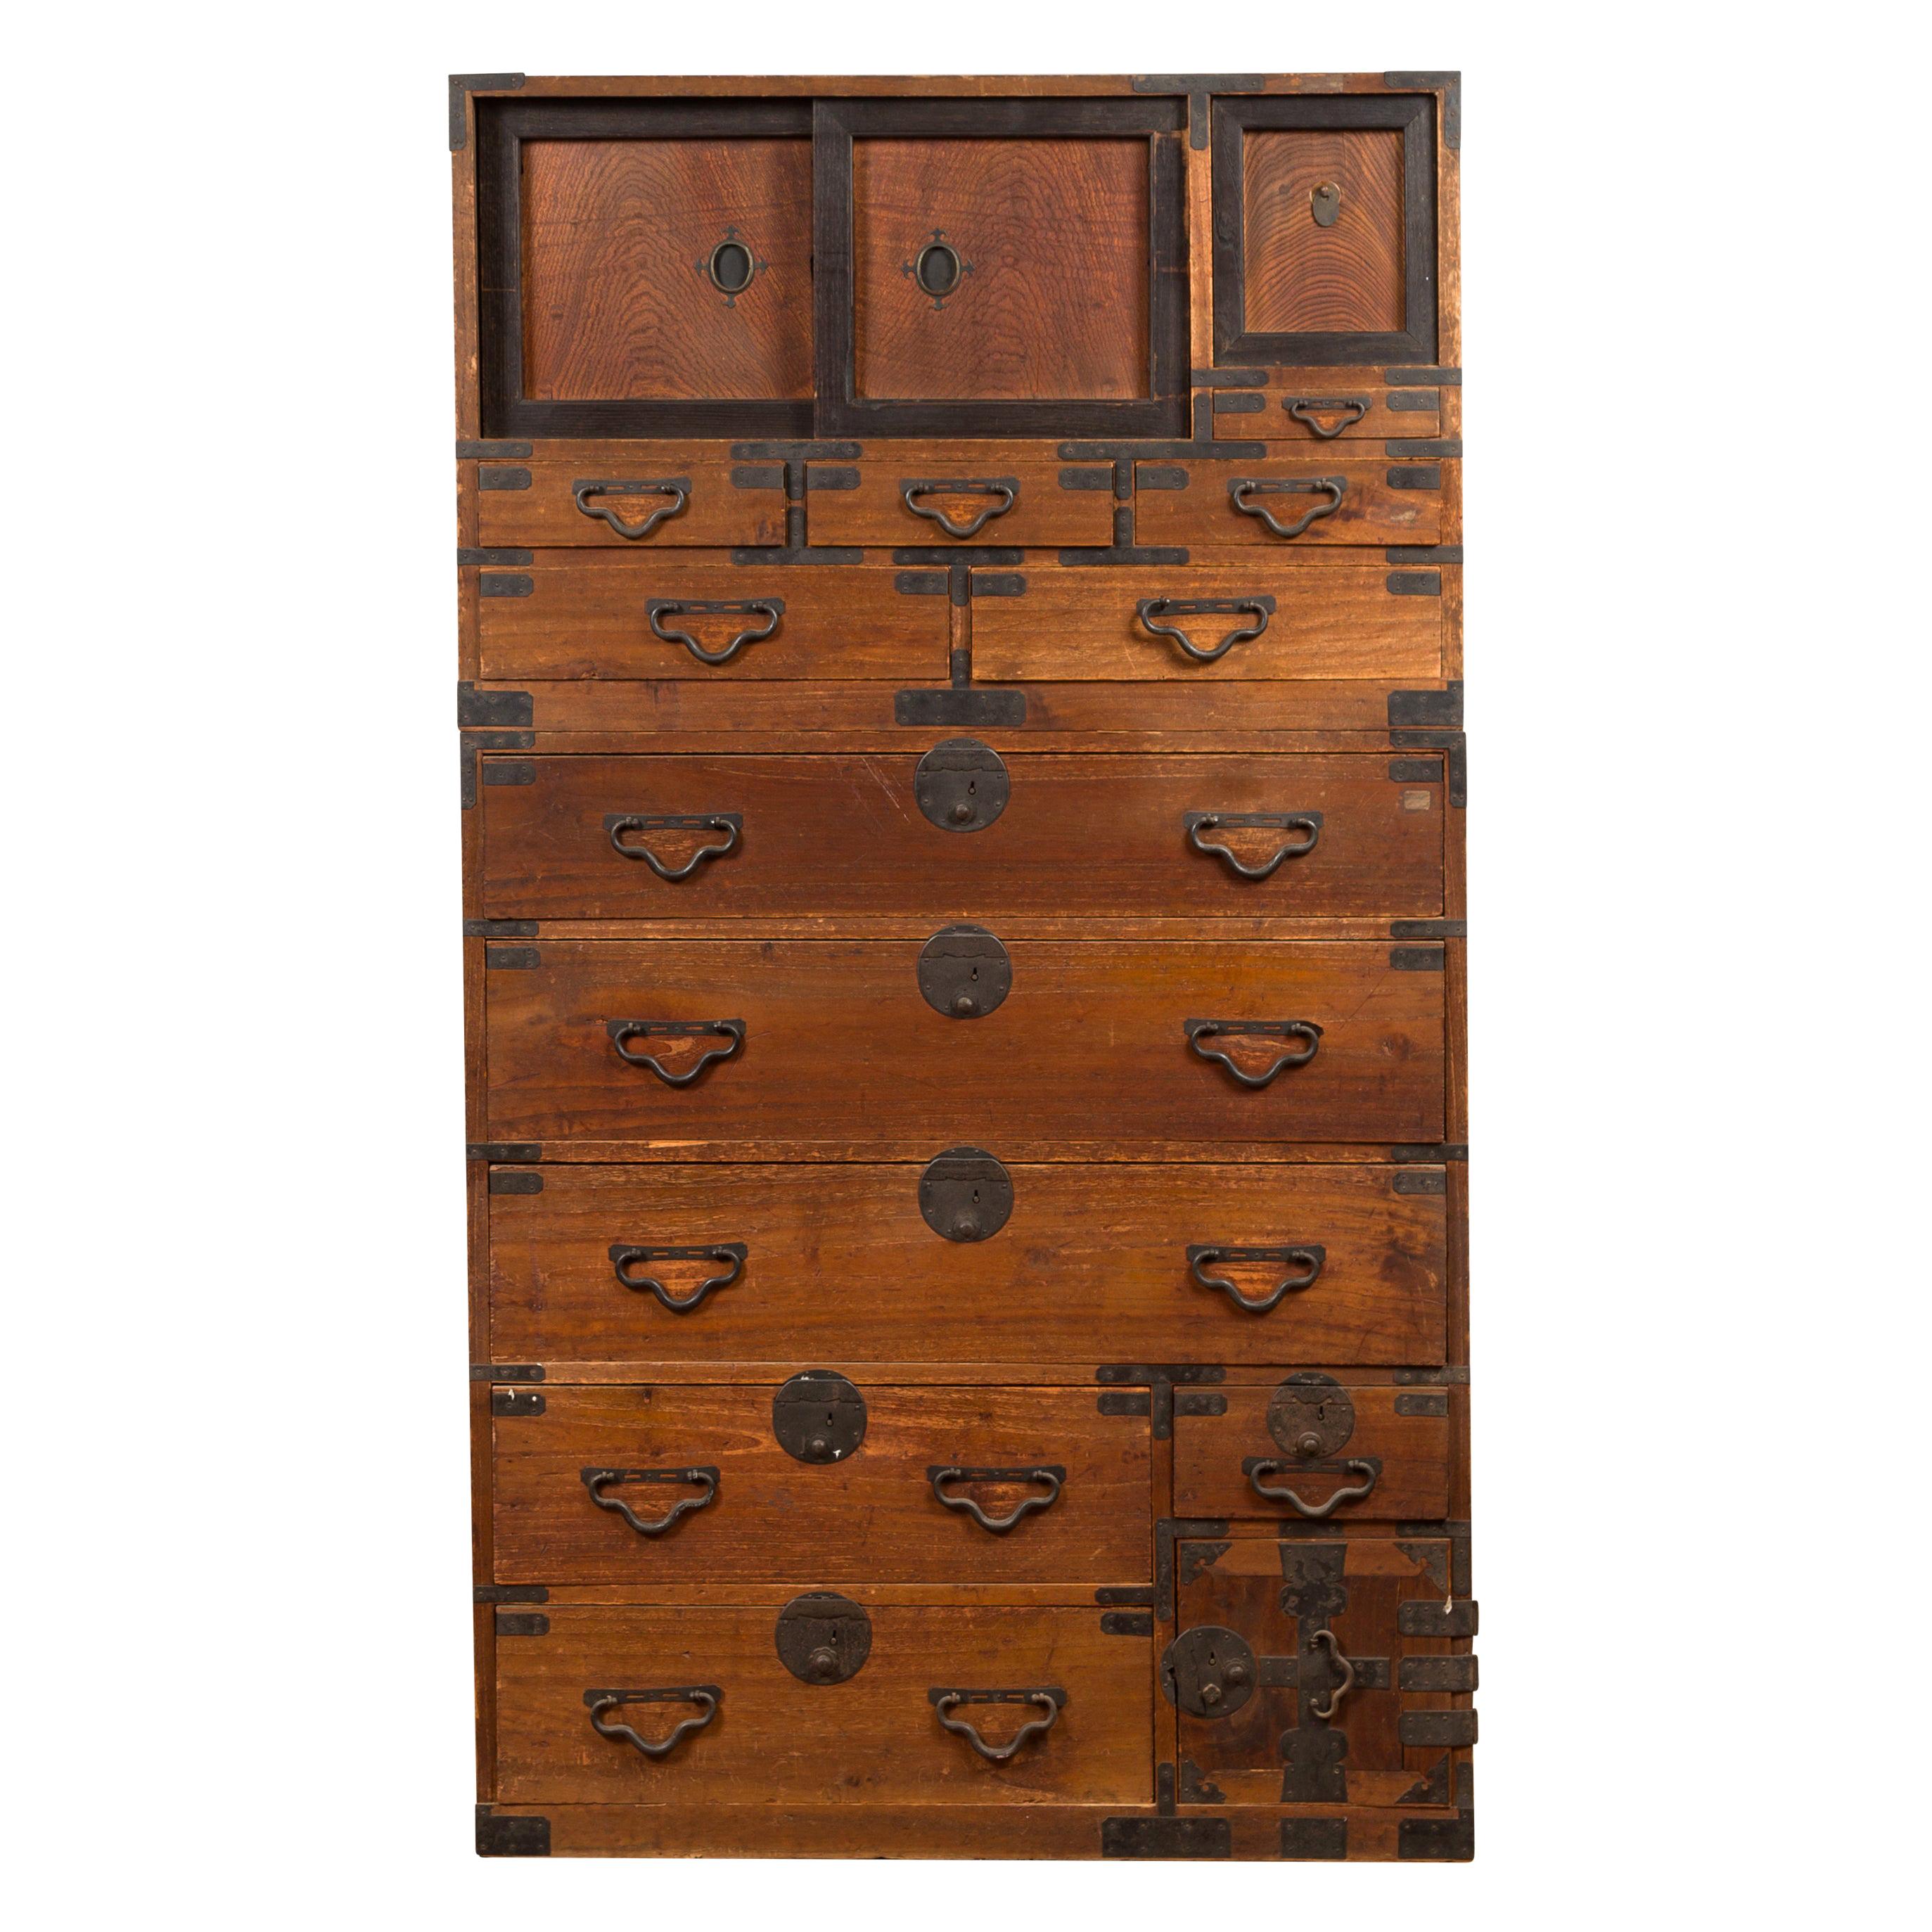 Meiji Period 19th Century Japanese Tansu Chest with Sliding Panels and Drawers